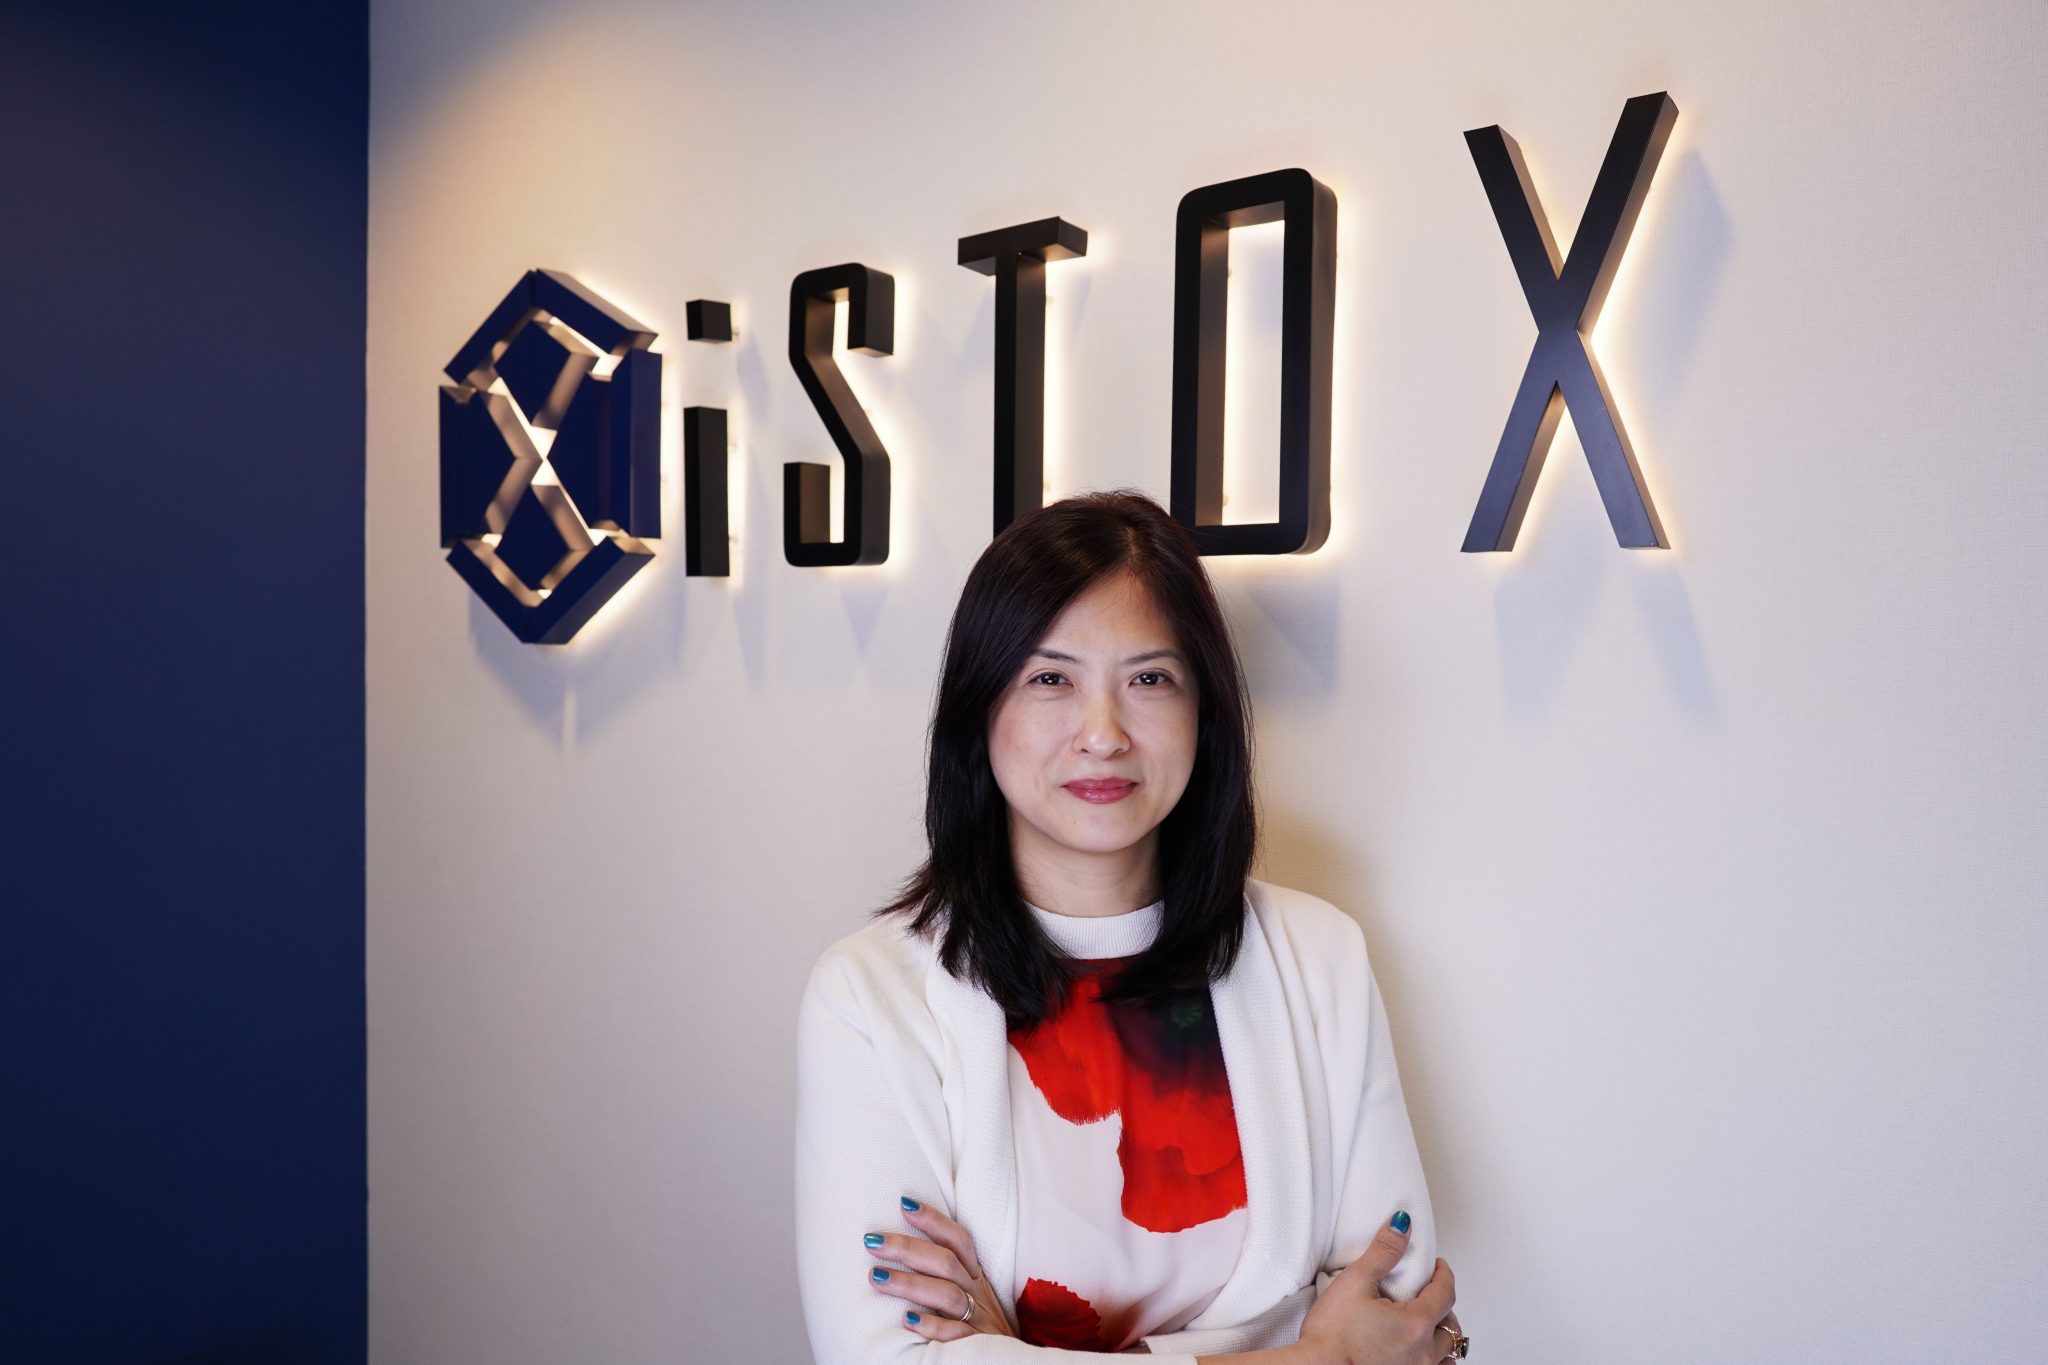 iSTOX’s chief commercial officer (CCO) Oi Yee Choo